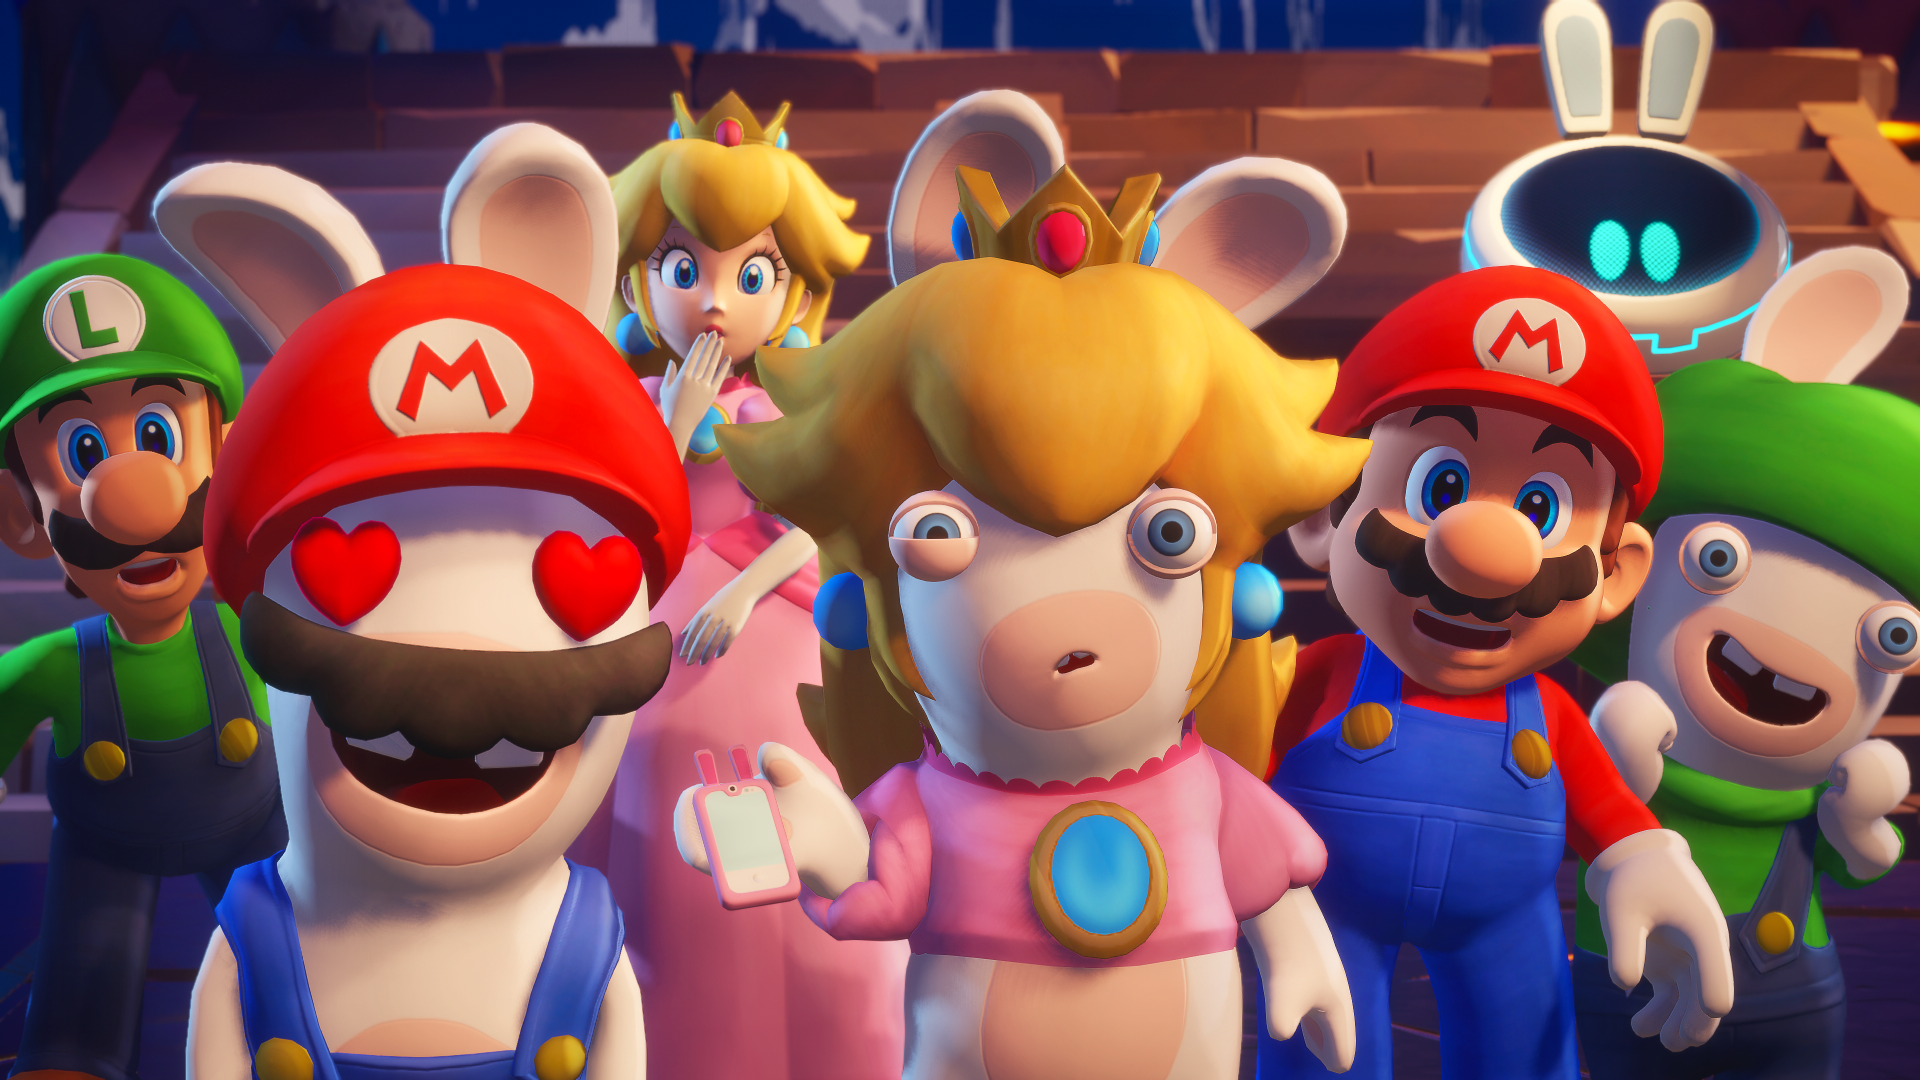 Video Game Mario + Rabbids Sparks of Hope HD Wallpaper | Background Image